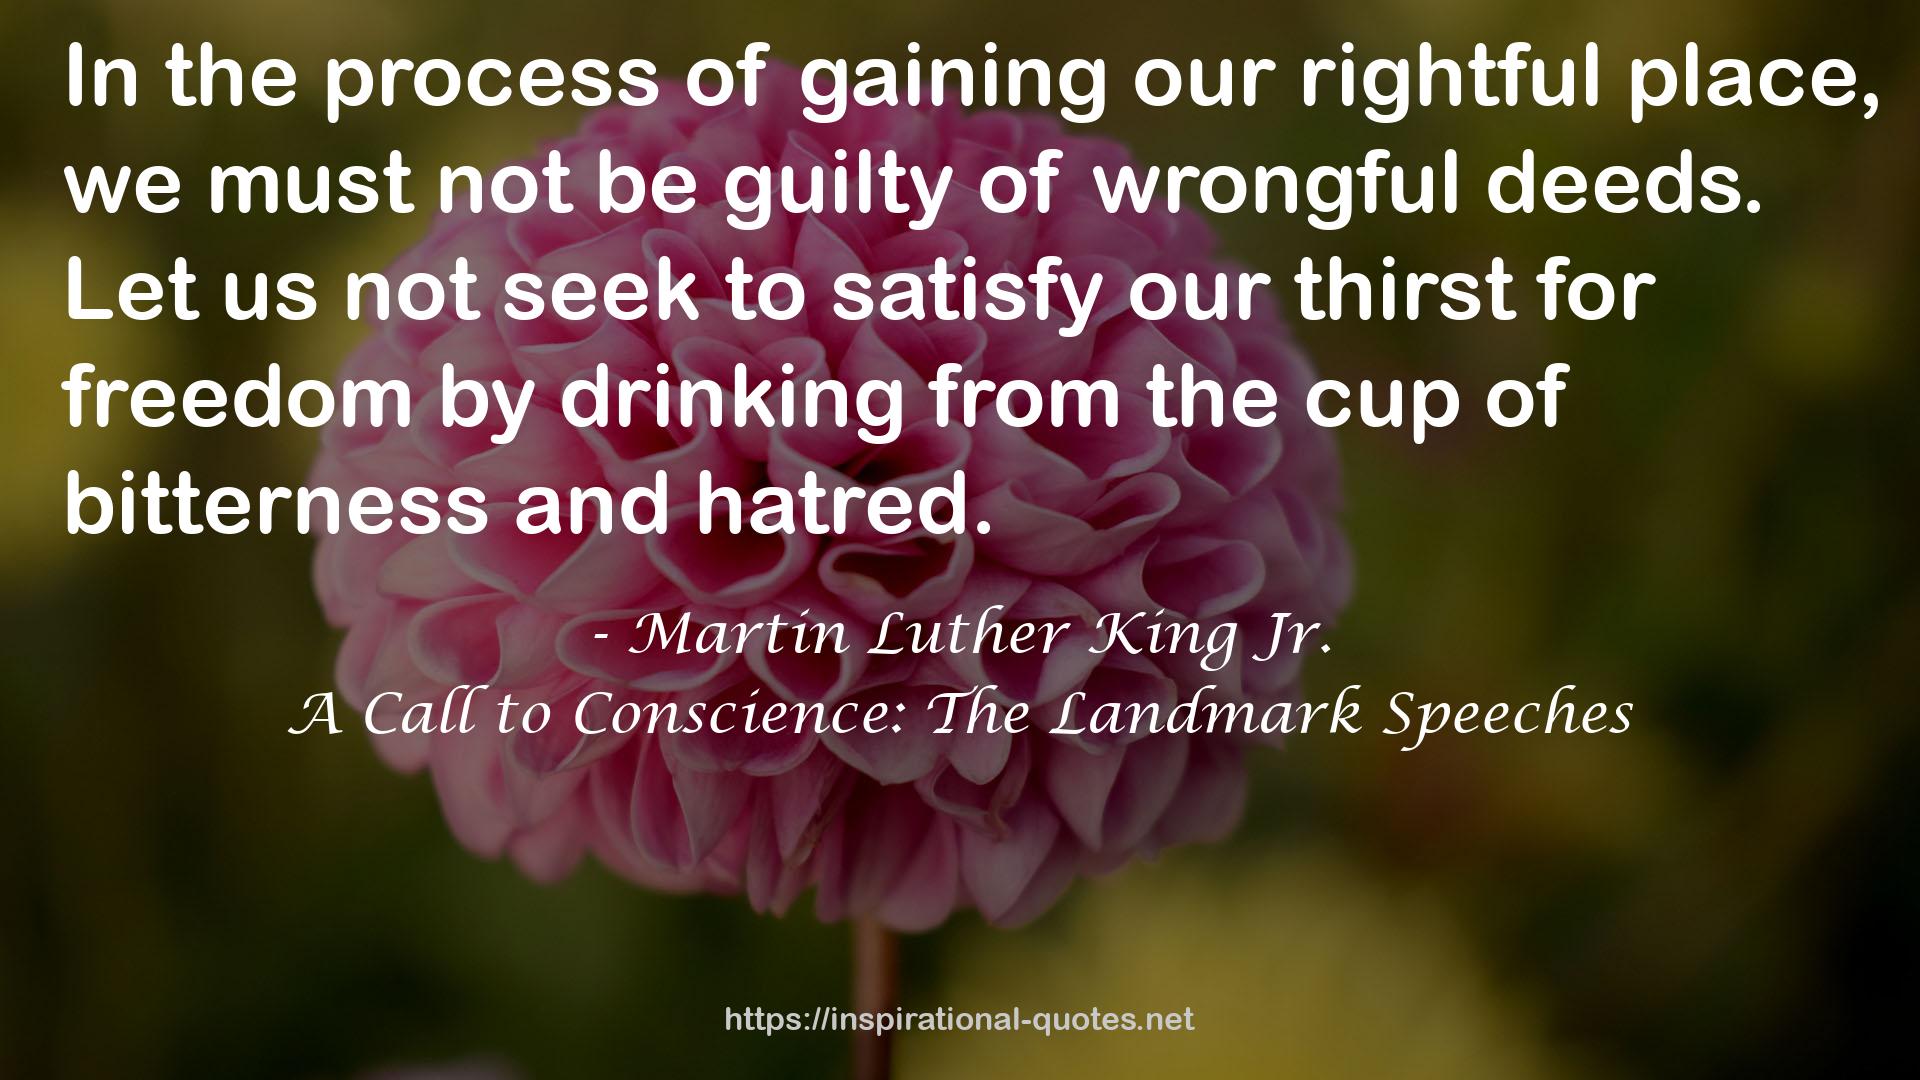 A Call to Conscience: The Landmark Speeches QUOTES